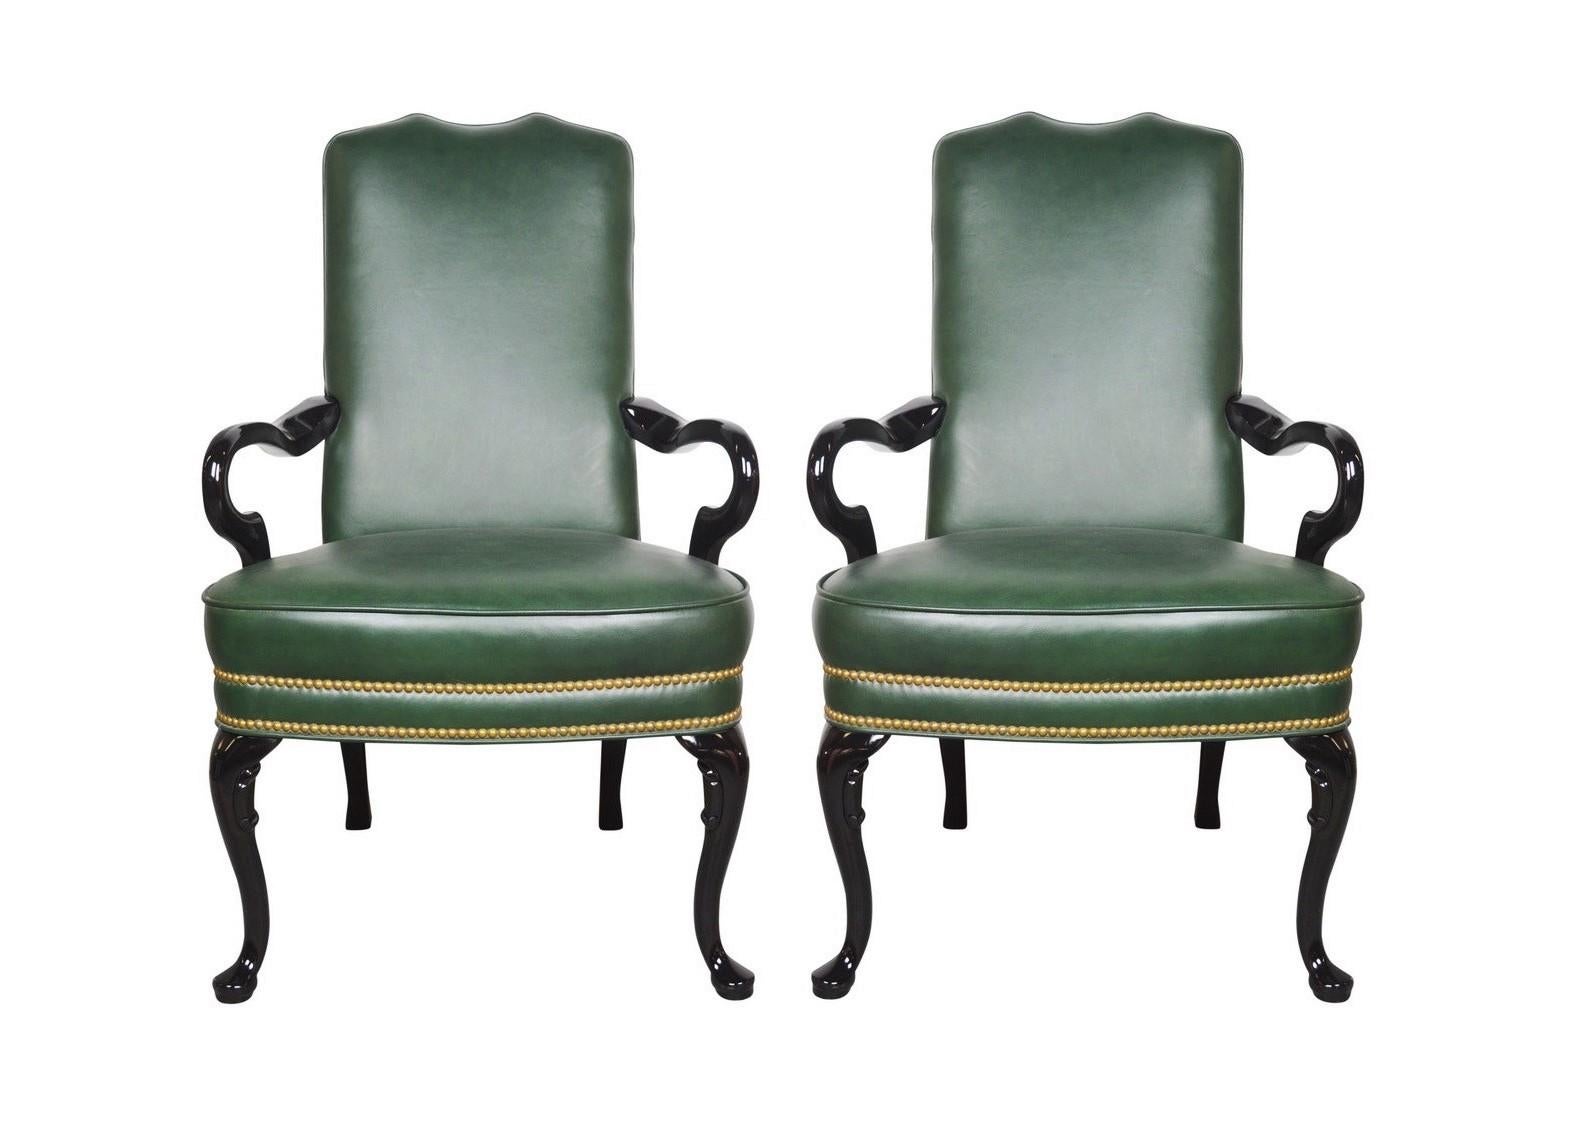 Pair of lovely vintage Queen Anne style library chairs. The chairs feature beautiful green upholstery with brass nail head trim, arms and legs in a very nice lacquered finish. Great silhouette with a yoke crest above a padded high back and seat